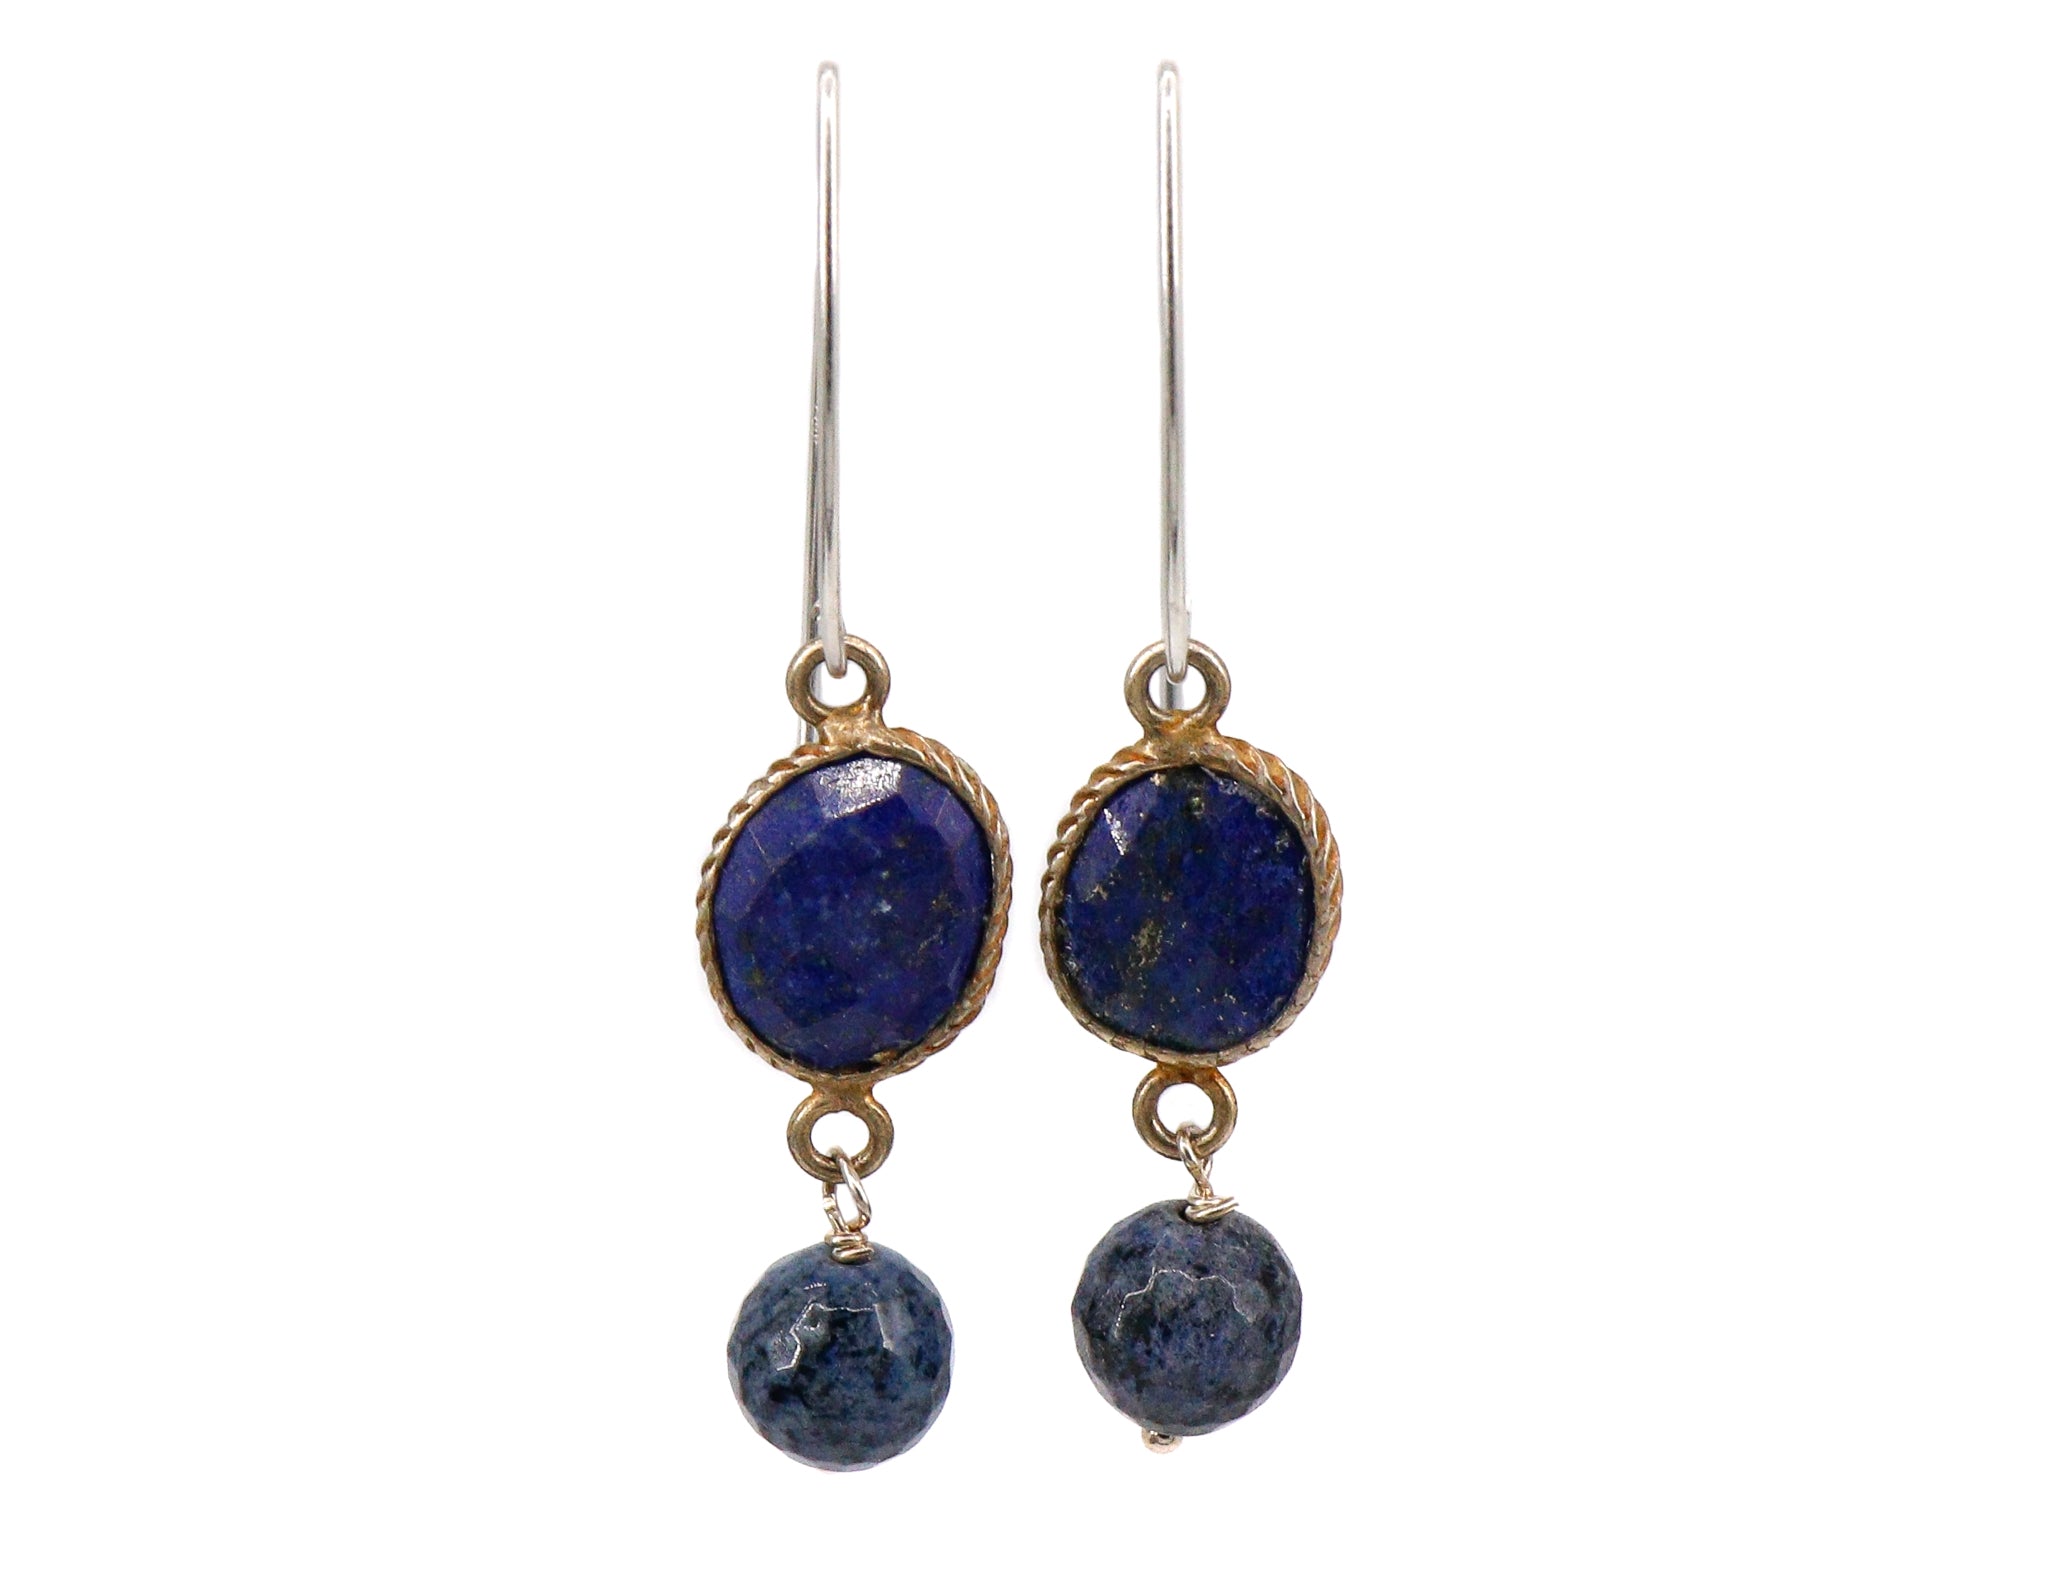 Vintage lapis with sterling silver earrings